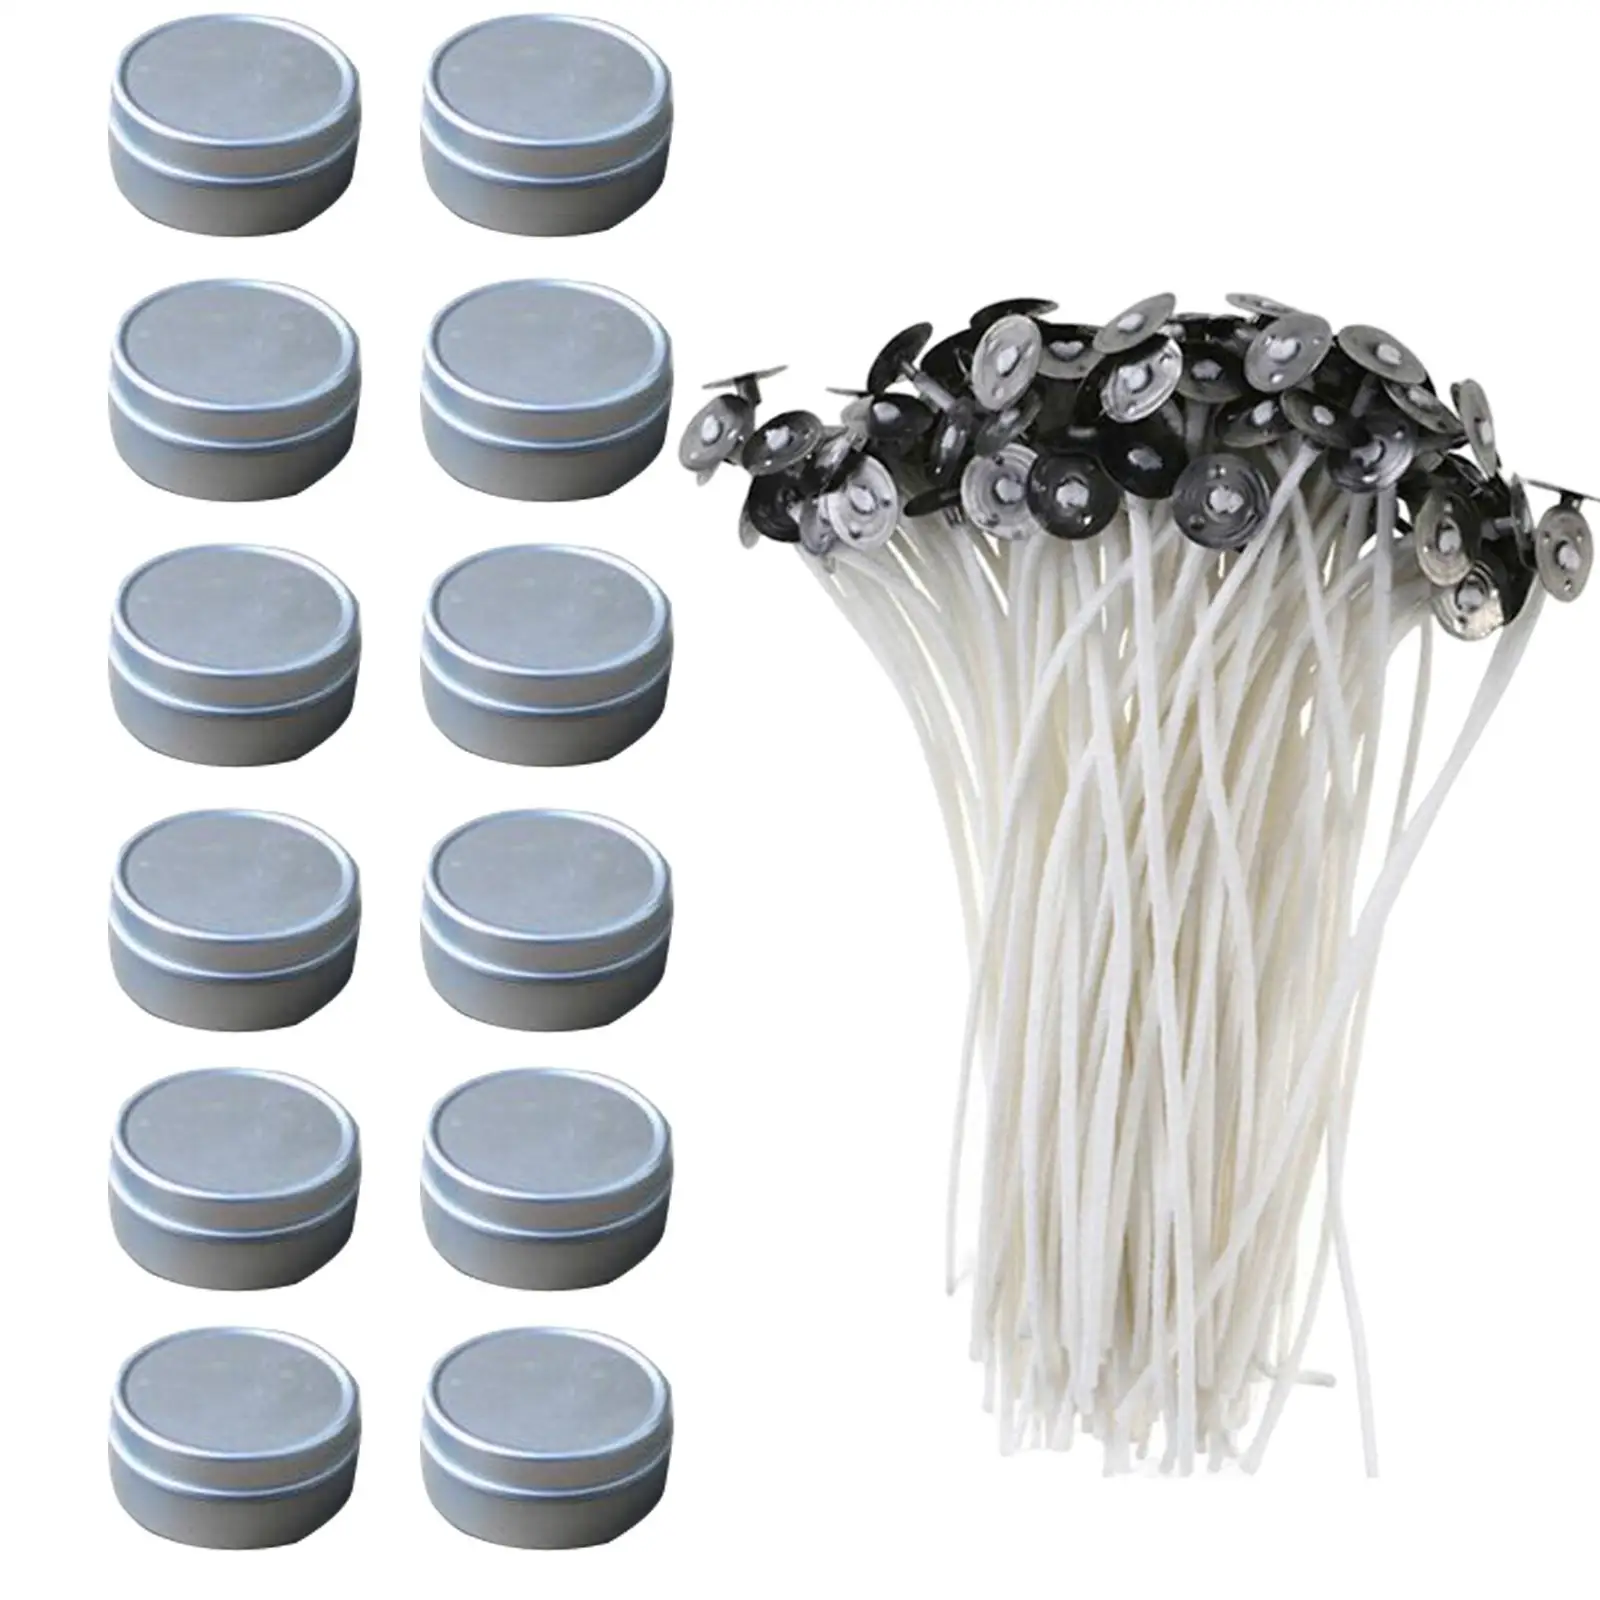 Pre Waxed 100x Candle Wicks Storage Box Candle DIY Containers with 12x Empty Candle Tins for Candle Making Soy Making Crafting